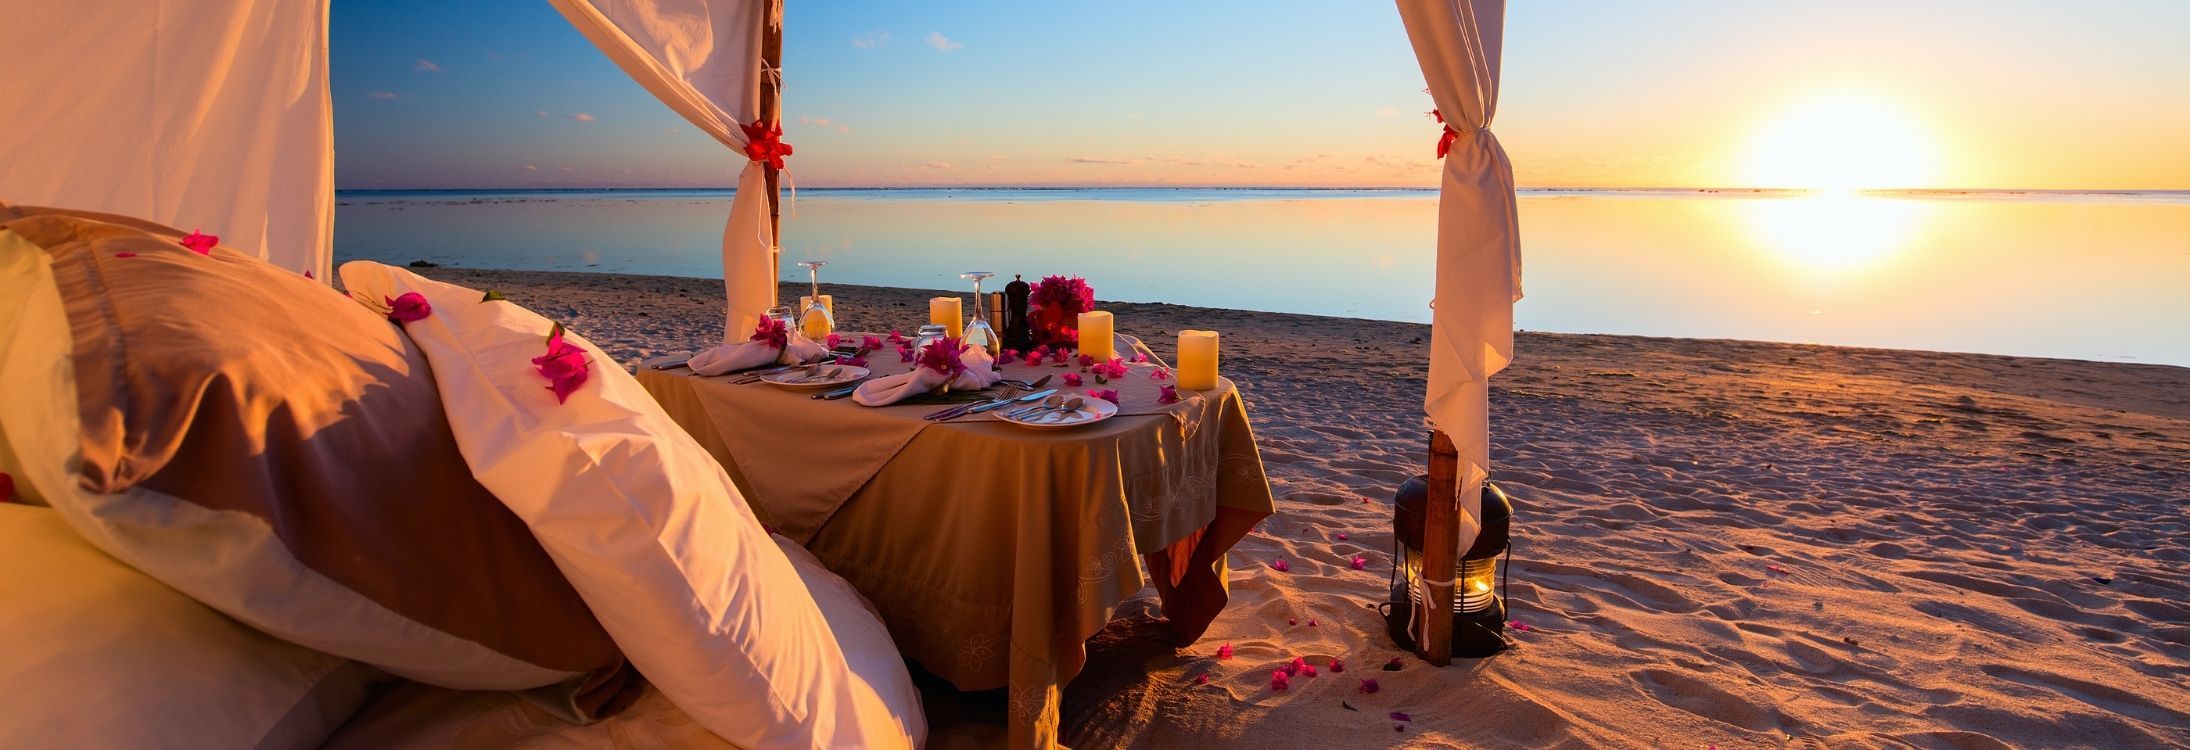 6 Romantic Restaurants In Mauritius For Your Date Night